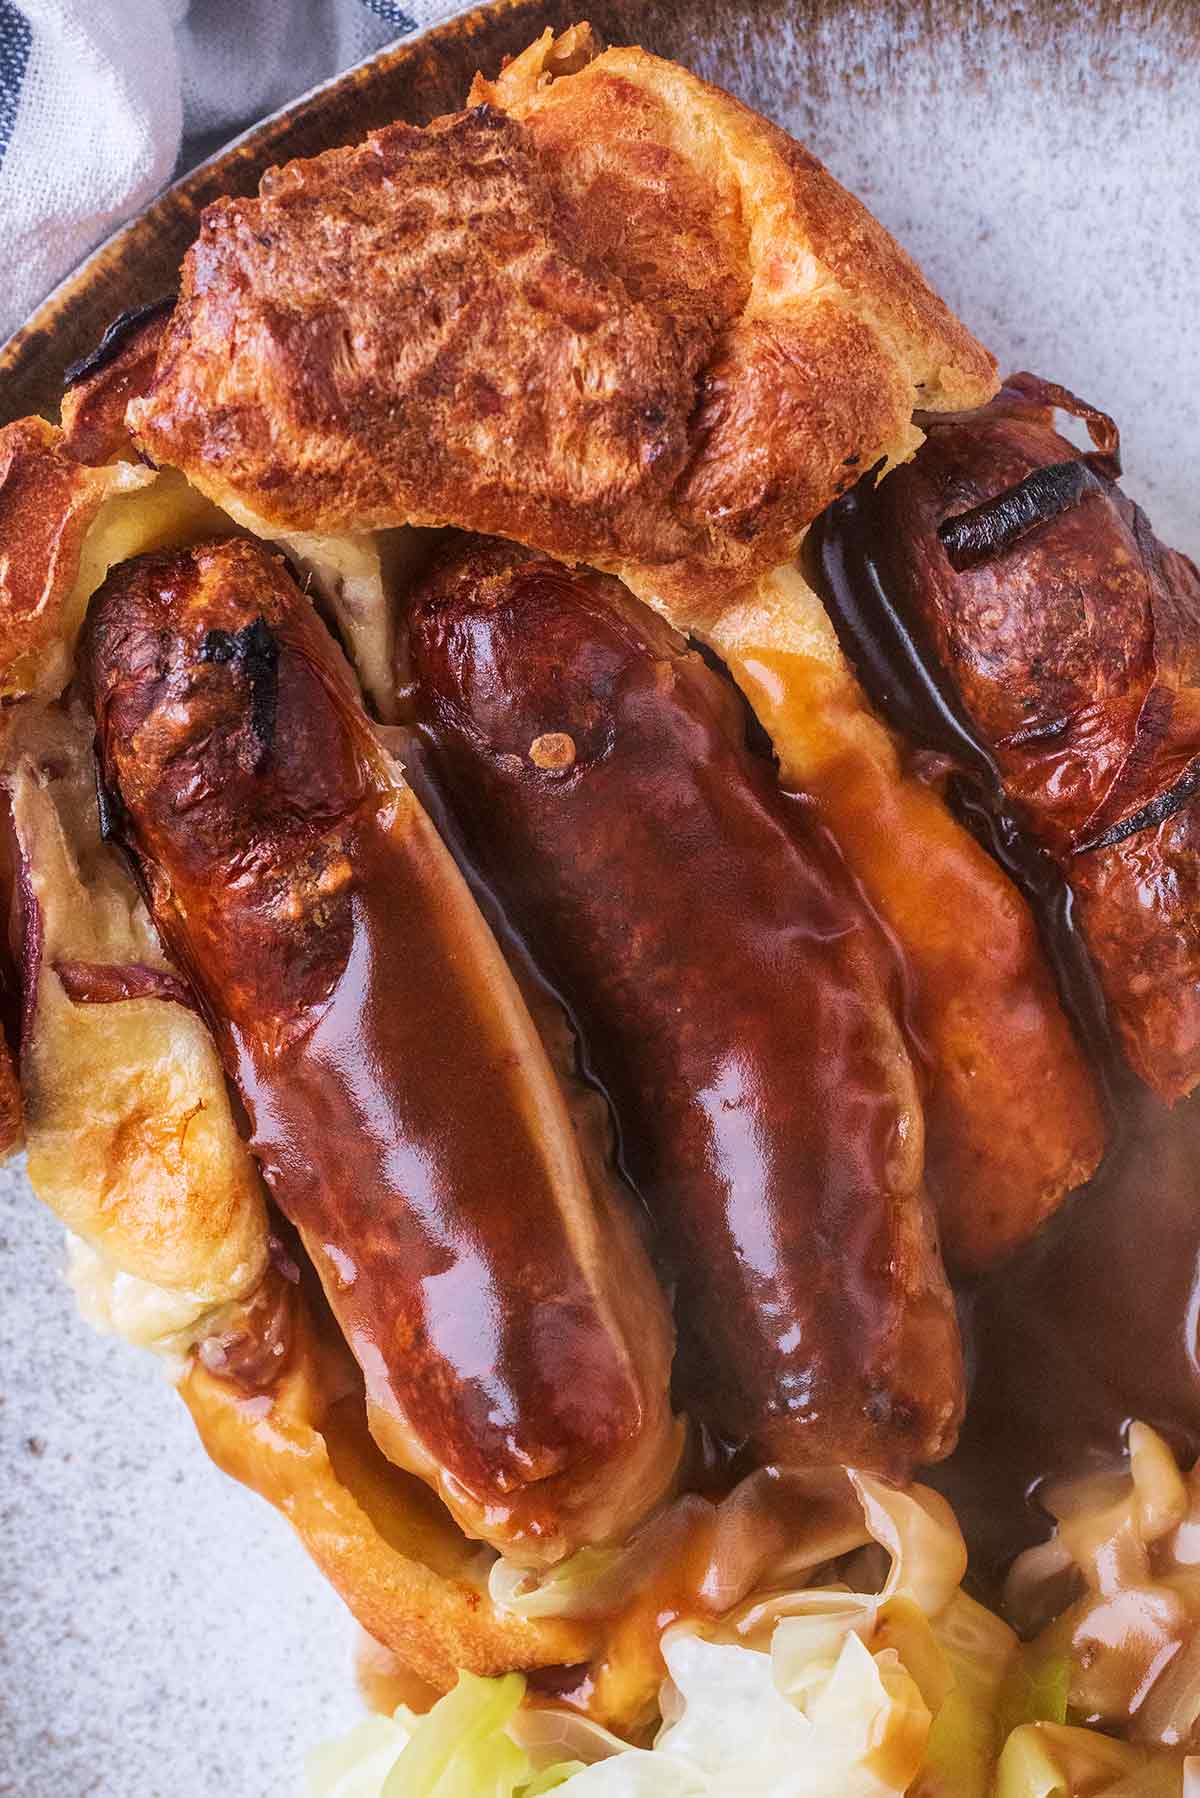 Three cooked sausages encased in Yorkshire pudding.